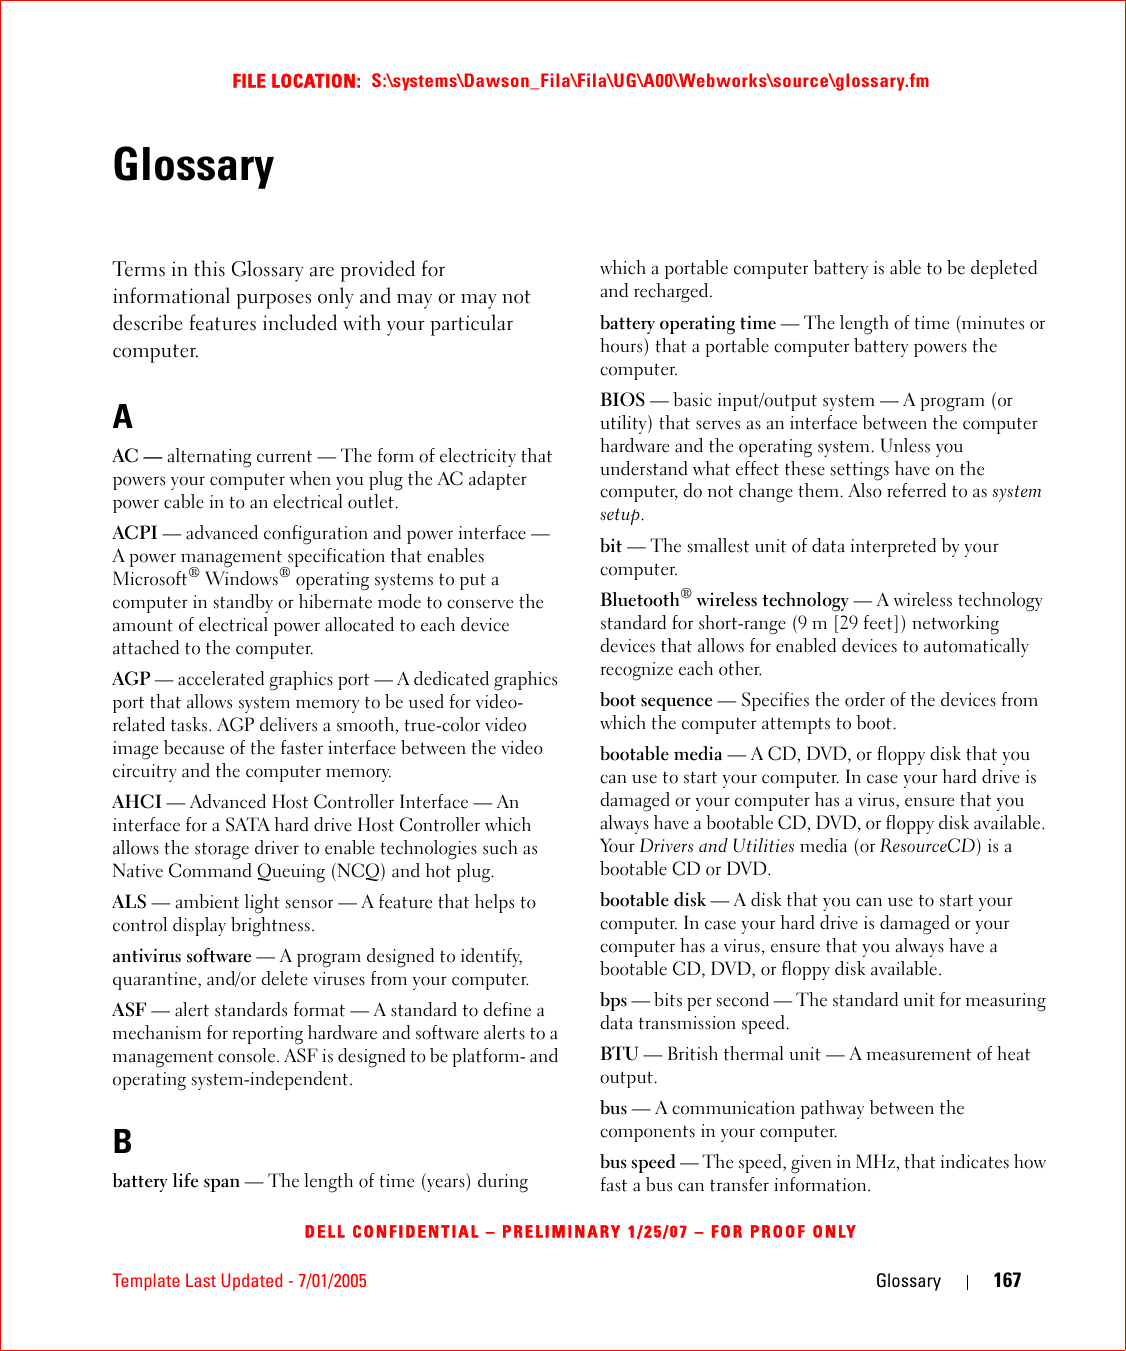 Template Last Updated - 7/01/2005 Glossary 167FILE LOCATION:  S:\systems\Dawson_Fila\Fila\UG\A00\Webworks\source\glossary.fmDELL CONFIDENTIAL – PRELIMINARY 1/25/07 – FOR PROOF ONLYGlossaryTerms in this Glossary are provided for informational purposes only and may or may not describe features included with your particular computer.AAC — alternating current — The form of electricity that powers your computer when you plug the AC adapter power cable in to an electrical outlet.ACPI — advanced configuration and power interface — A power management specification that enables Microsoft® Windows® operating systems to put a computer in standby or hibernate mode to conserve the amount of electrical power allocated to each device attached to the computer.AGP — accelerated graphics port — A dedicated graphics port that allows system memory to be used for video-related tasks. AGP delivers a smooth, true-color video image because of the faster interface between the video circuitry and the computer memory.AHCI — Advanced Host Controller Interface — An interface for a SATA hard drive Host Controller which allows the storage driver to enable technologies such as Native Command Queuing (NCQ) and hot plug.ALS — ambient light sensor — A feature that helps to control display brightness.antivirus software — A program designed to identify, quarantine, and/or delete viruses from your computer.ASF — alert standards format — A standard to define a mechanism for reporting hardware and software alerts to a management console. ASF is designed to be platform- and operating system-independent.Bbattery life span — The length of time (years) during which a portable computer battery is able to be depleted and recharged.battery operating time — The length of time (minutes or hours) that a portable computer battery powers the computer.BIOS — basic input/output system — A program (or utility) that serves as an interface between the computer hardware and the operating system. Unless you understand what effect these settings have on the computer, do not change them. Also referred to as system setup.bit — The smallest unit of data interpreted by your computer.Bluetooth® wireless technology — A wireless technology standard for short-range (9 m [29 feet]) networking devices that allows for enabled devices to automatically recognize each other.boot sequence — Specifies the order of the devices from which the computer attempts to boot.bootable media — A CD, DVD, or floppy disk that you can use to start your computer. In case your hard drive is damaged or your computer has a virus, ensure that you always have a bootable CD, DVD, or floppy disk available. Yo u r   Drivers and Utilities media (or ResourceCD) is a bootable CD or DVD.bootable disk — A disk that you can use to start your computer. In case your hard drive is damaged or your computer has a virus, ensure that you always have a bootable CD, DVD, or floppy disk available.bps — bits per second — The standard unit for measuring data transmission speed.BTU — British thermal unit — A measurement of heat output.bus — A communication pathway between the components in your computer.bus speed — The speed, given in MHz, that indicates how fast a bus can transfer information.